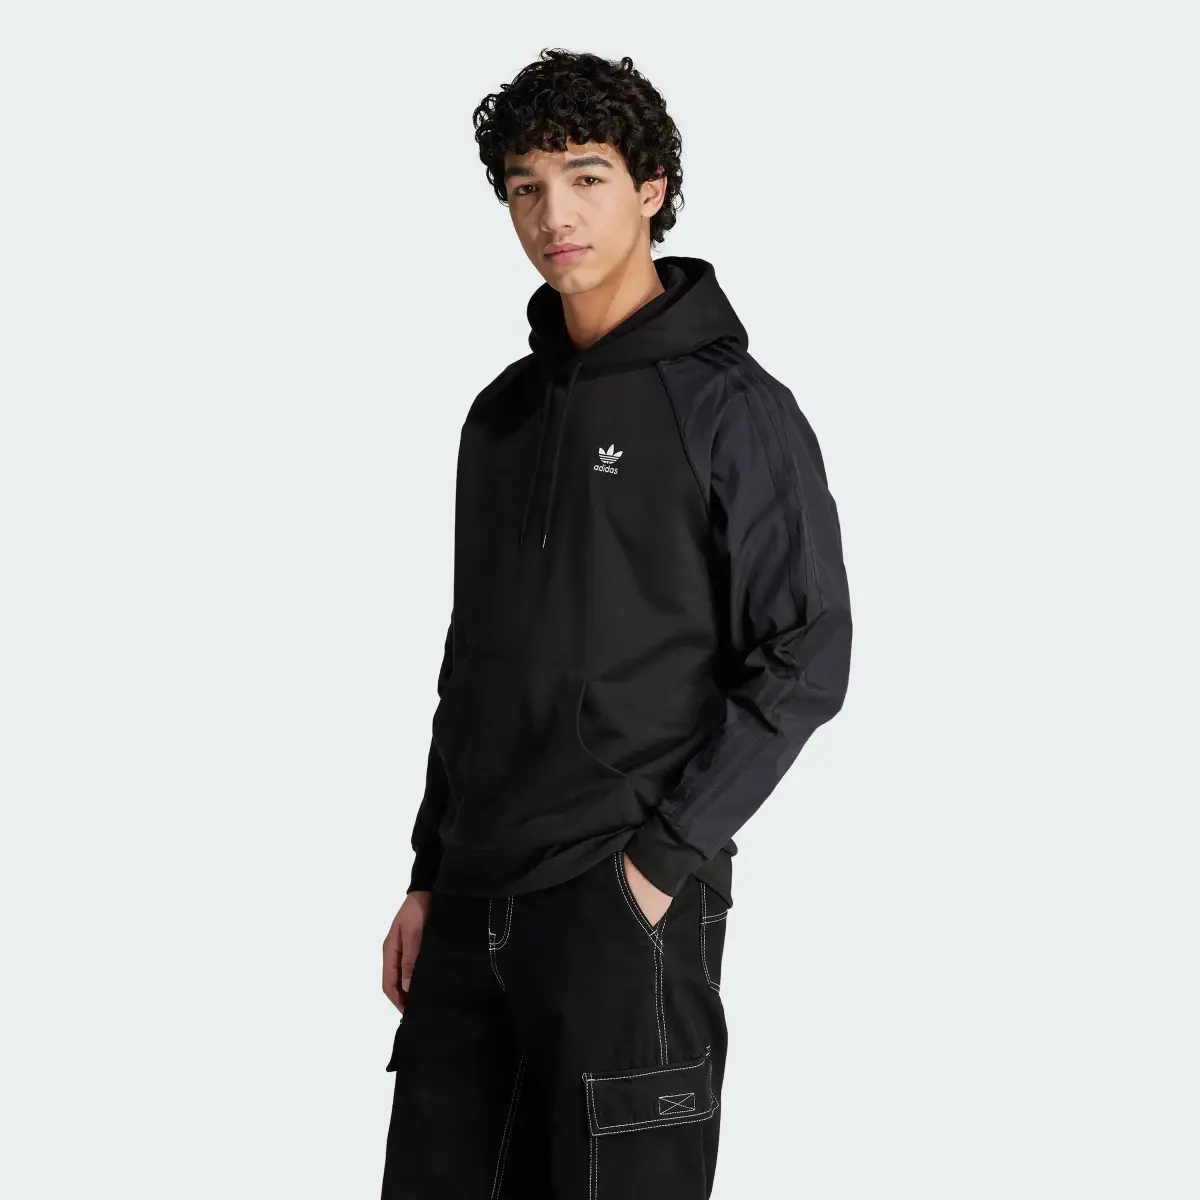 Adidas Adicolor Re-Pro SST Material Mix Hoodie. 2